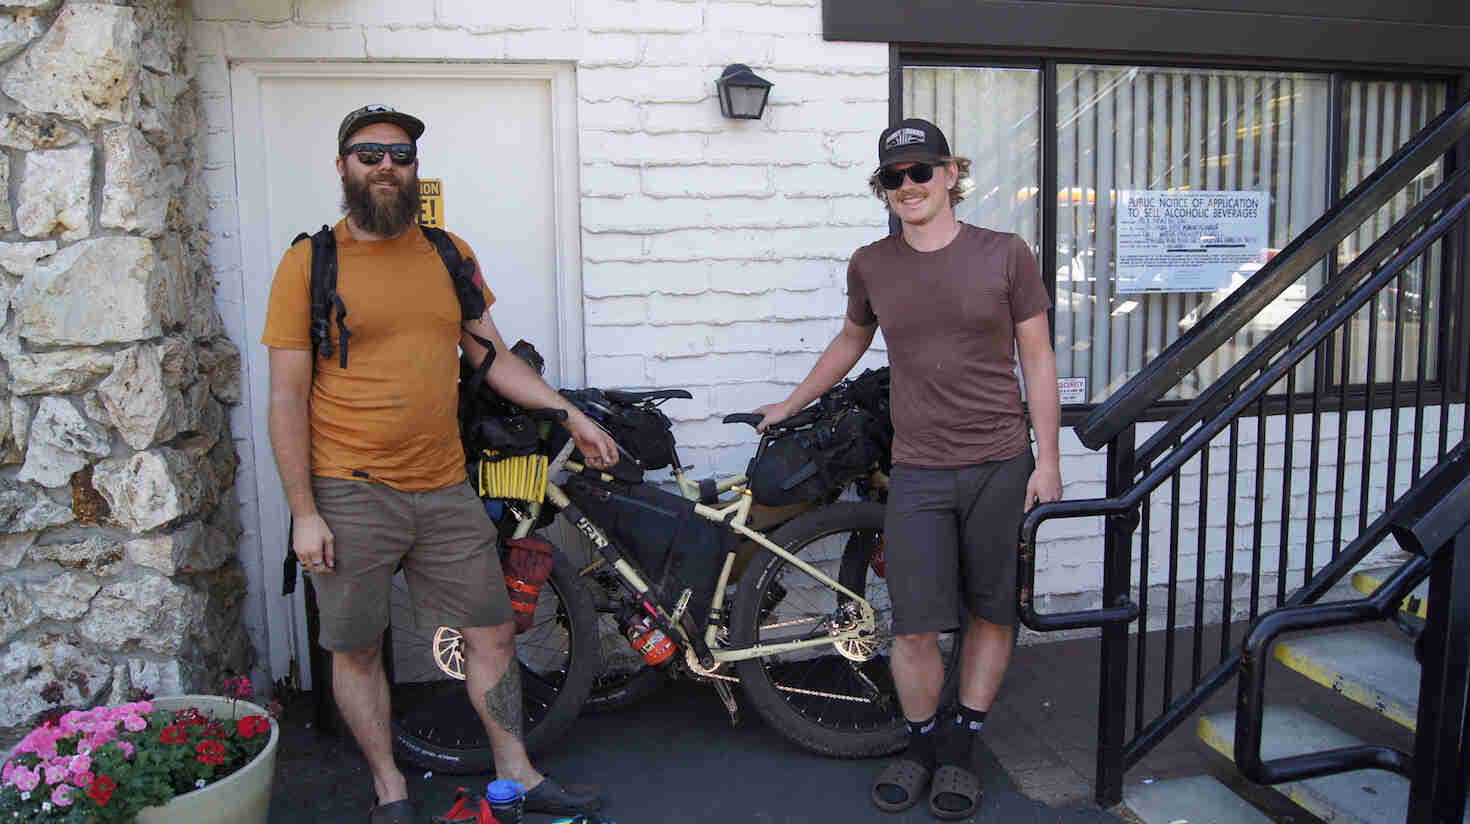 Front view of two cyclists standing with Surly fat bikes, in front of a motel room